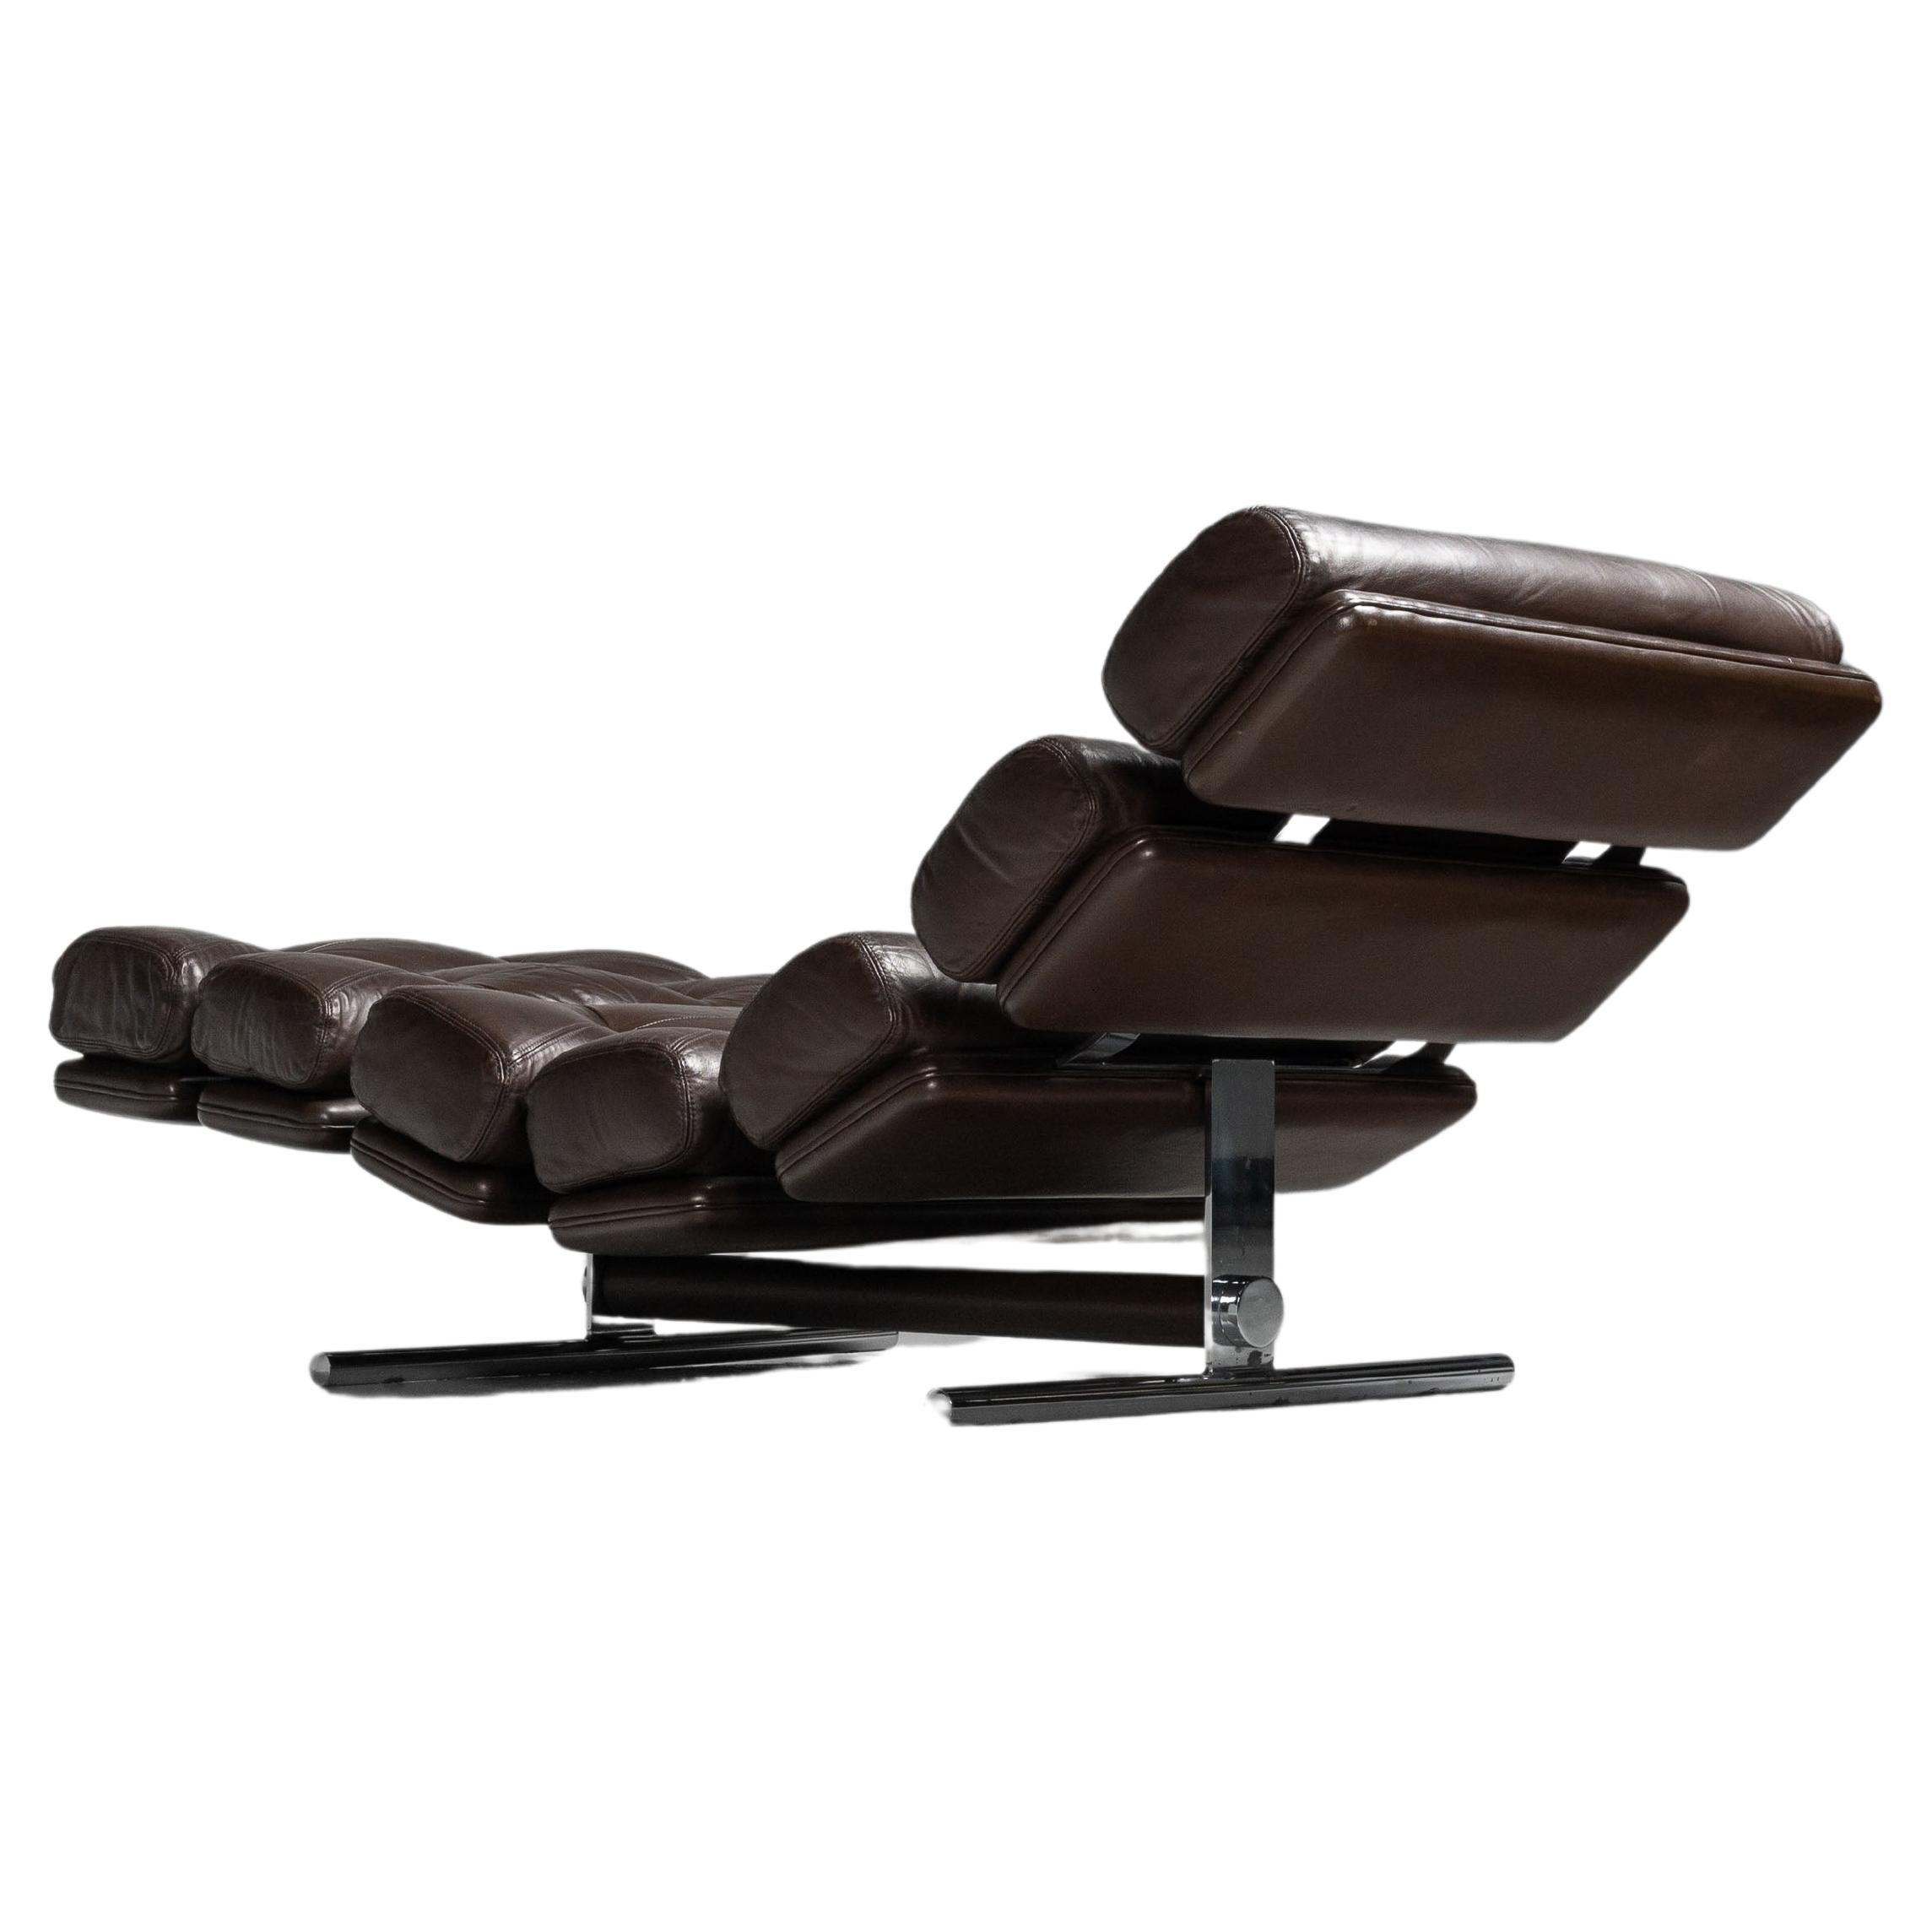 Ric Deforche Lord lounge chair Gervan Belgium 1970 For Sale